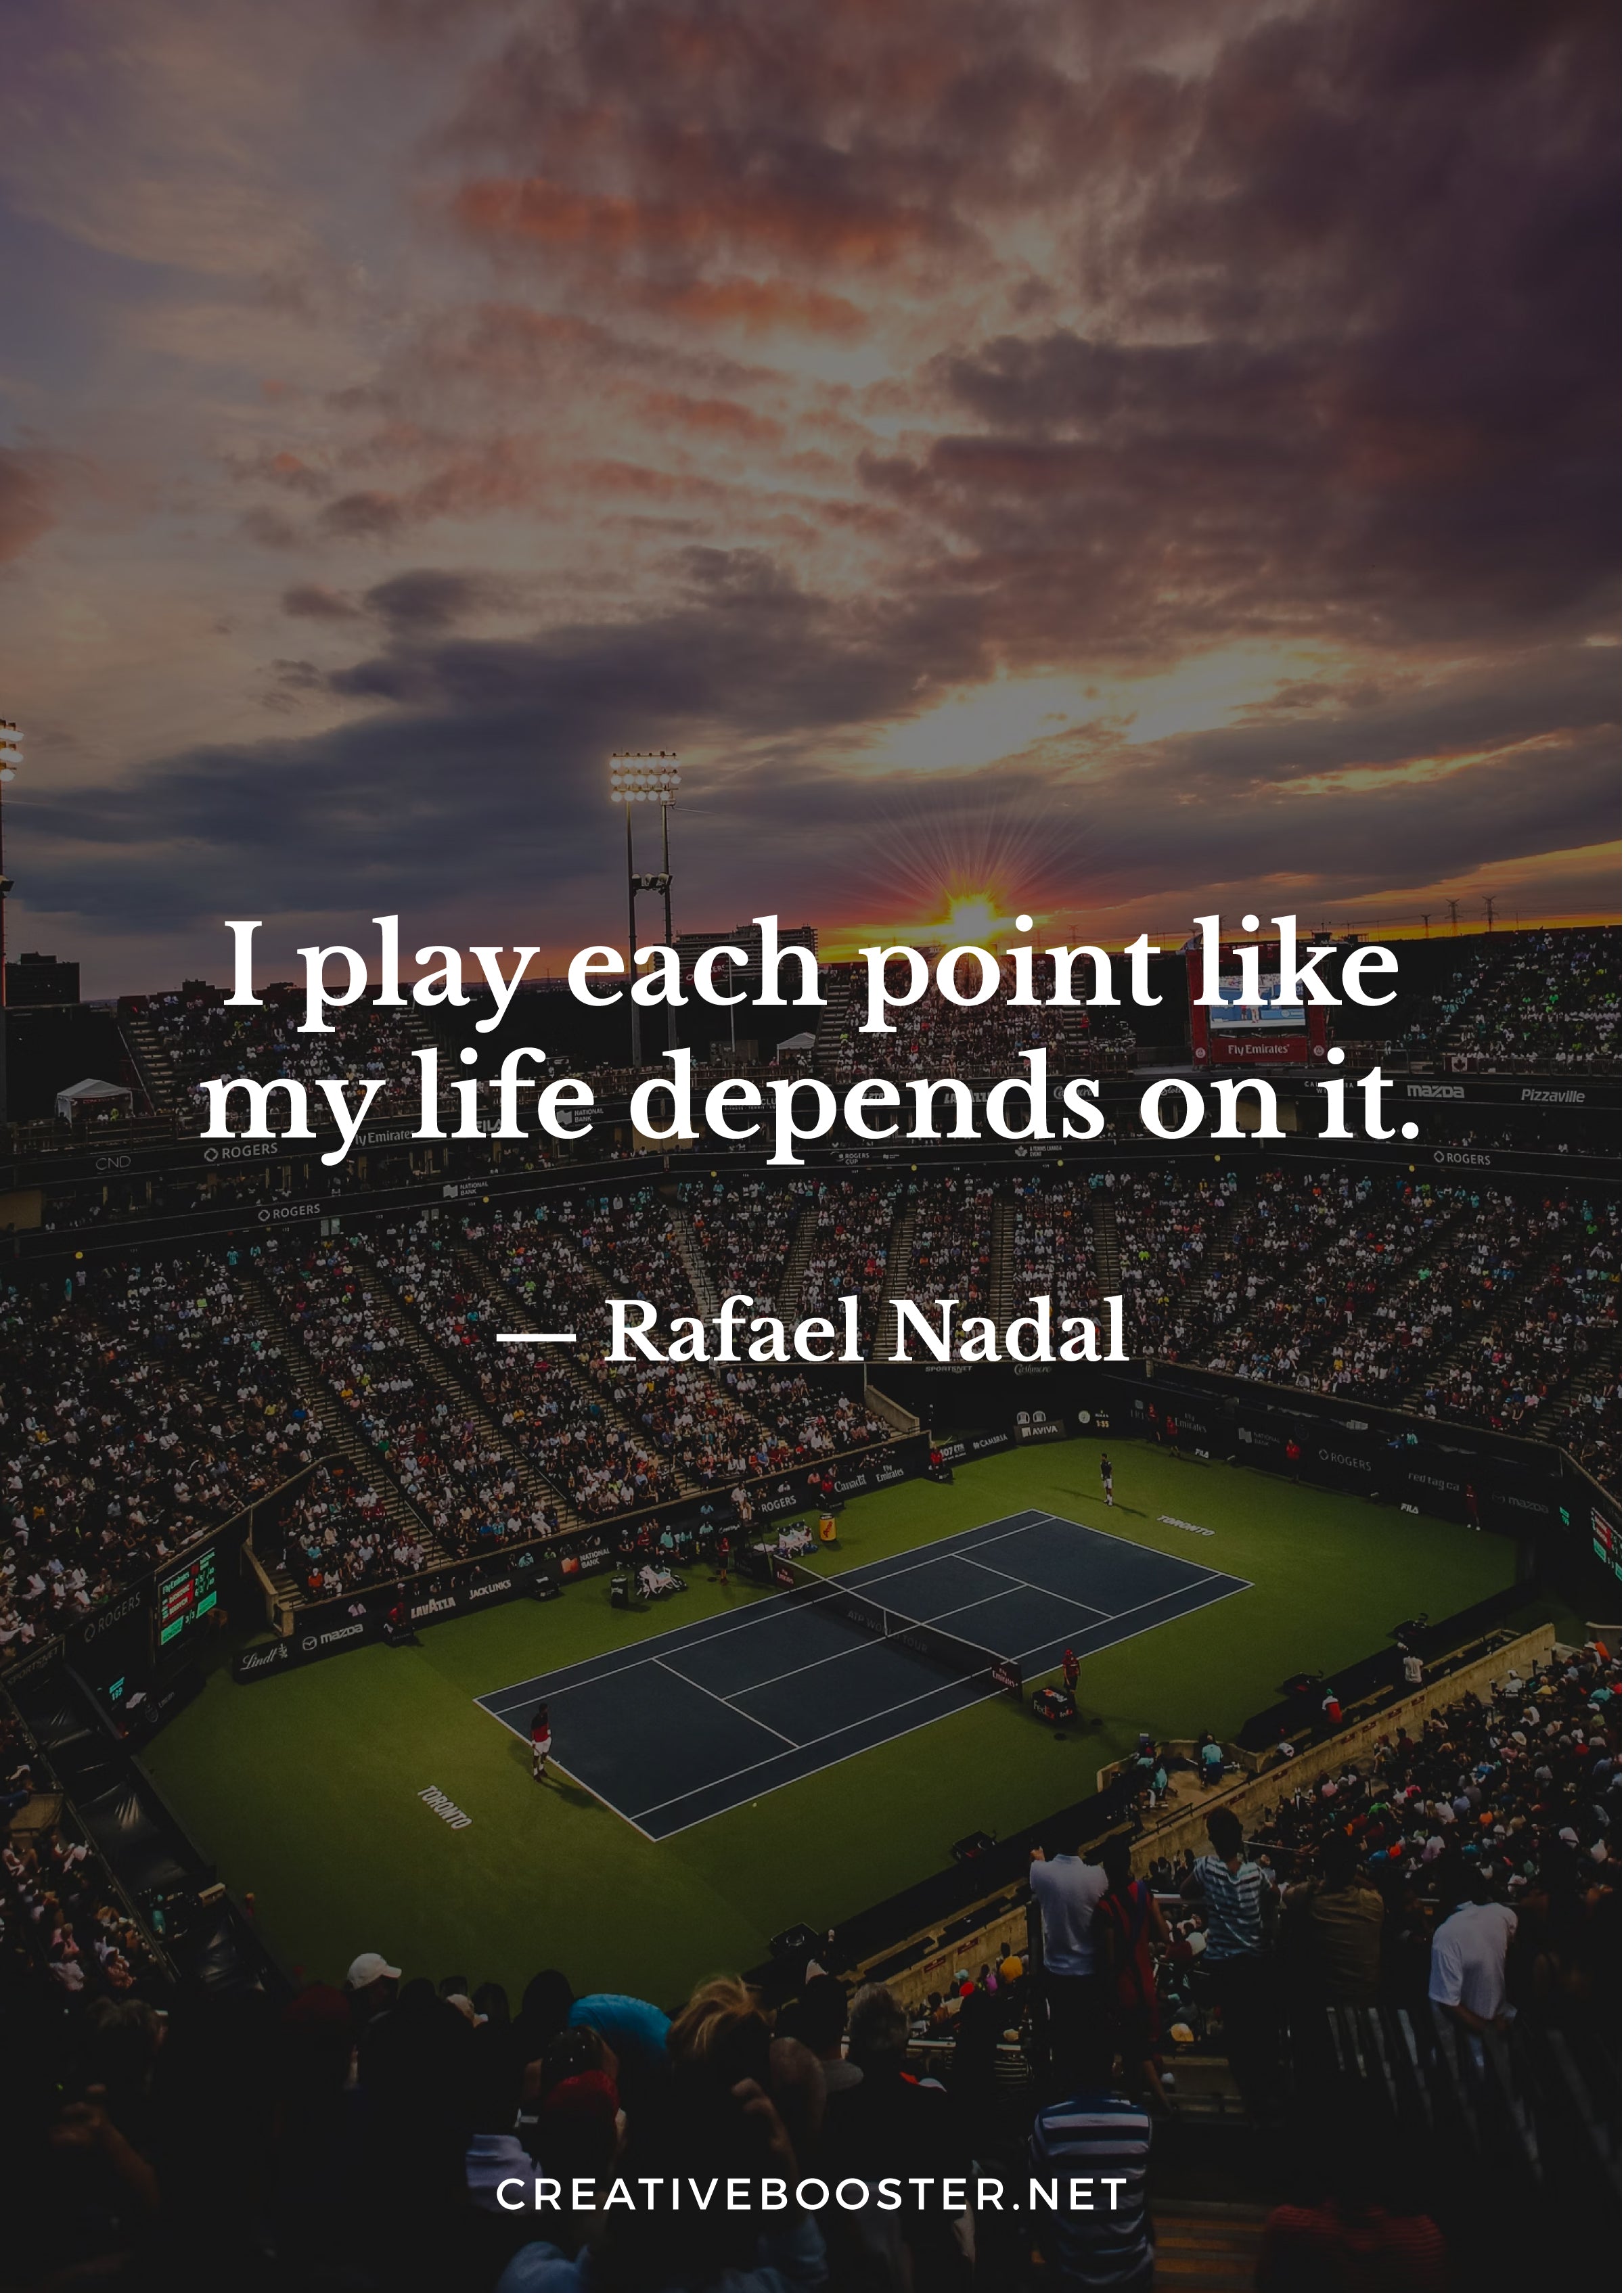 "I play each point like my life depends on it." – Rafael Nadal